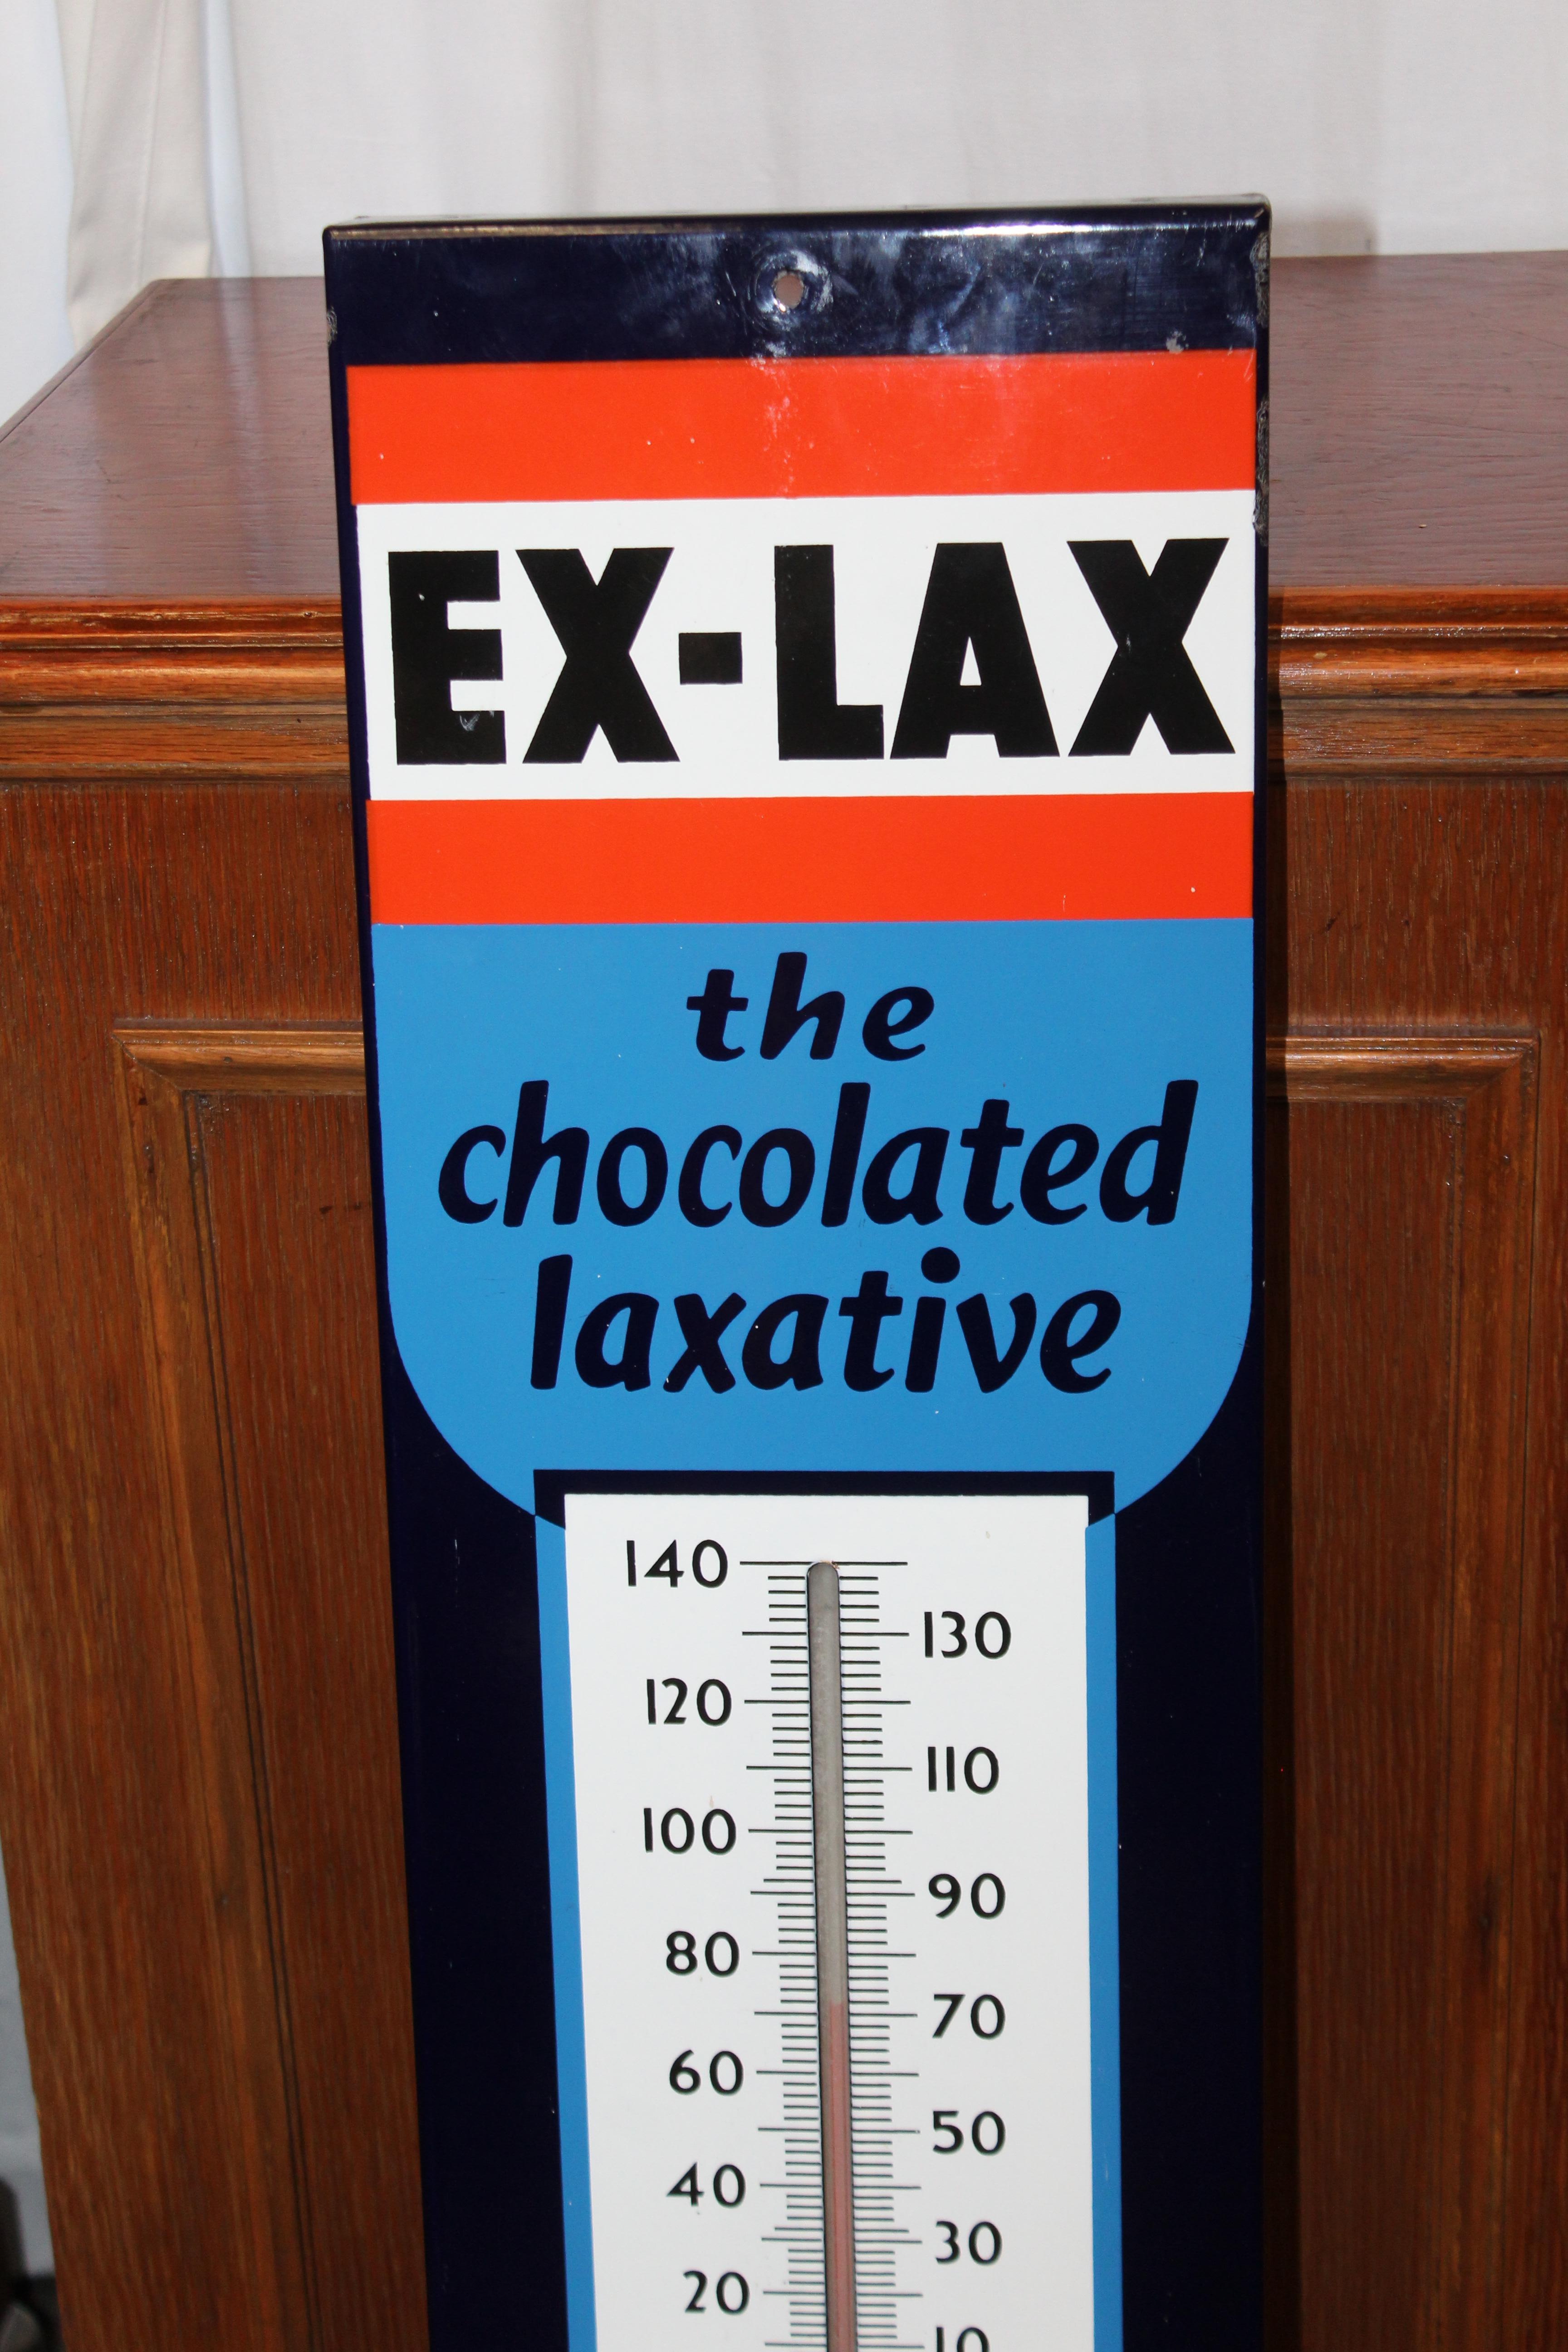 The Ex-Lax company was founded in 1906. This laxative was very popular because it tasted like chocolate, and this made it easier for children to take a laxative without a fight. The sign is made on porcelain and the colors are still bright.